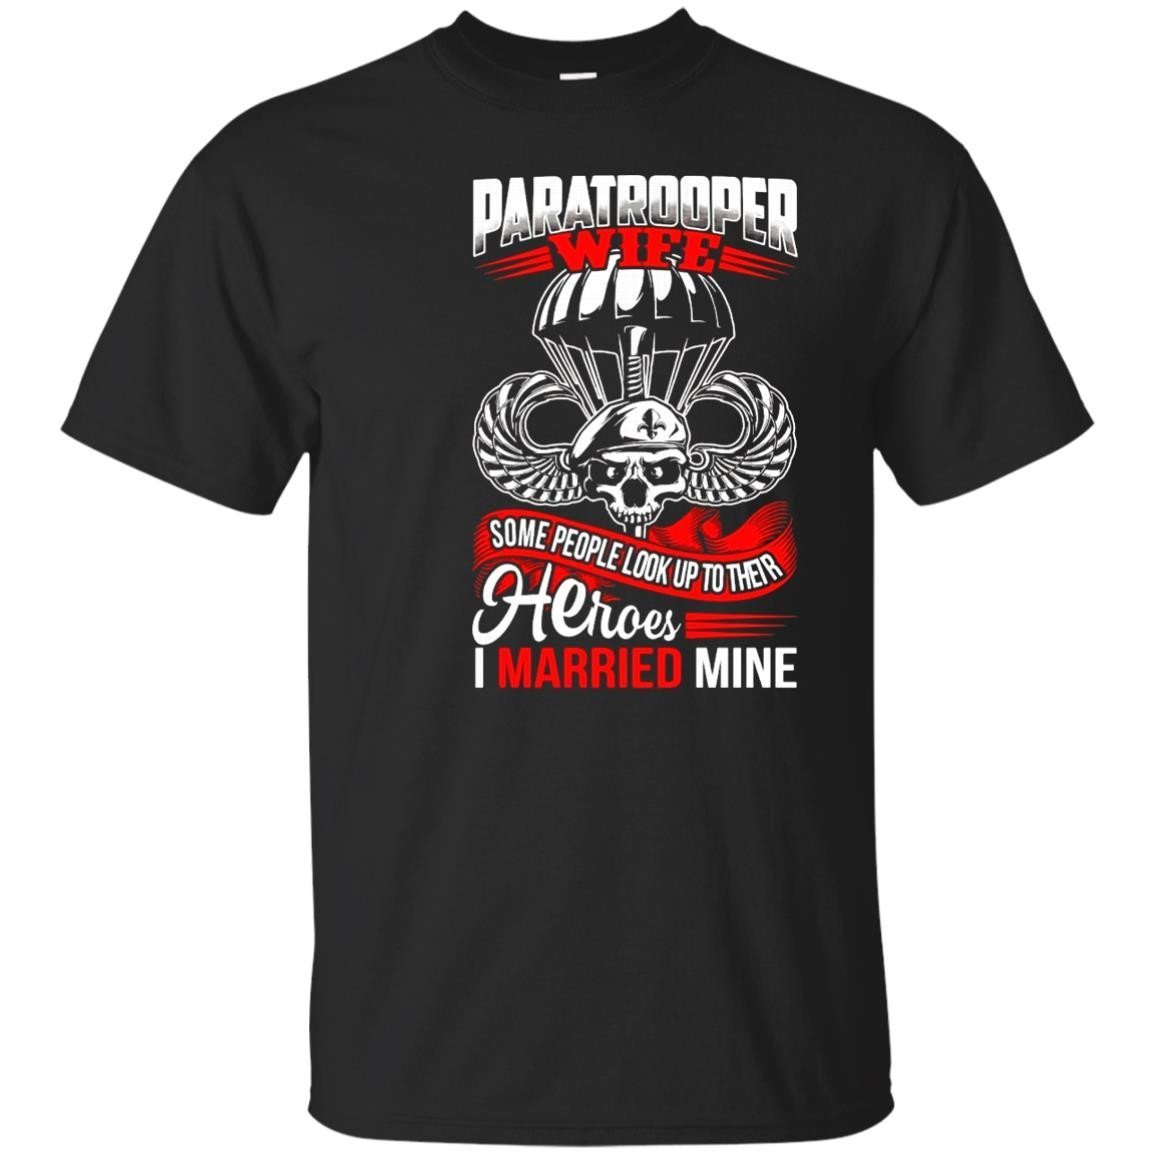 Unbelievable Paratrooper Wife Shirts